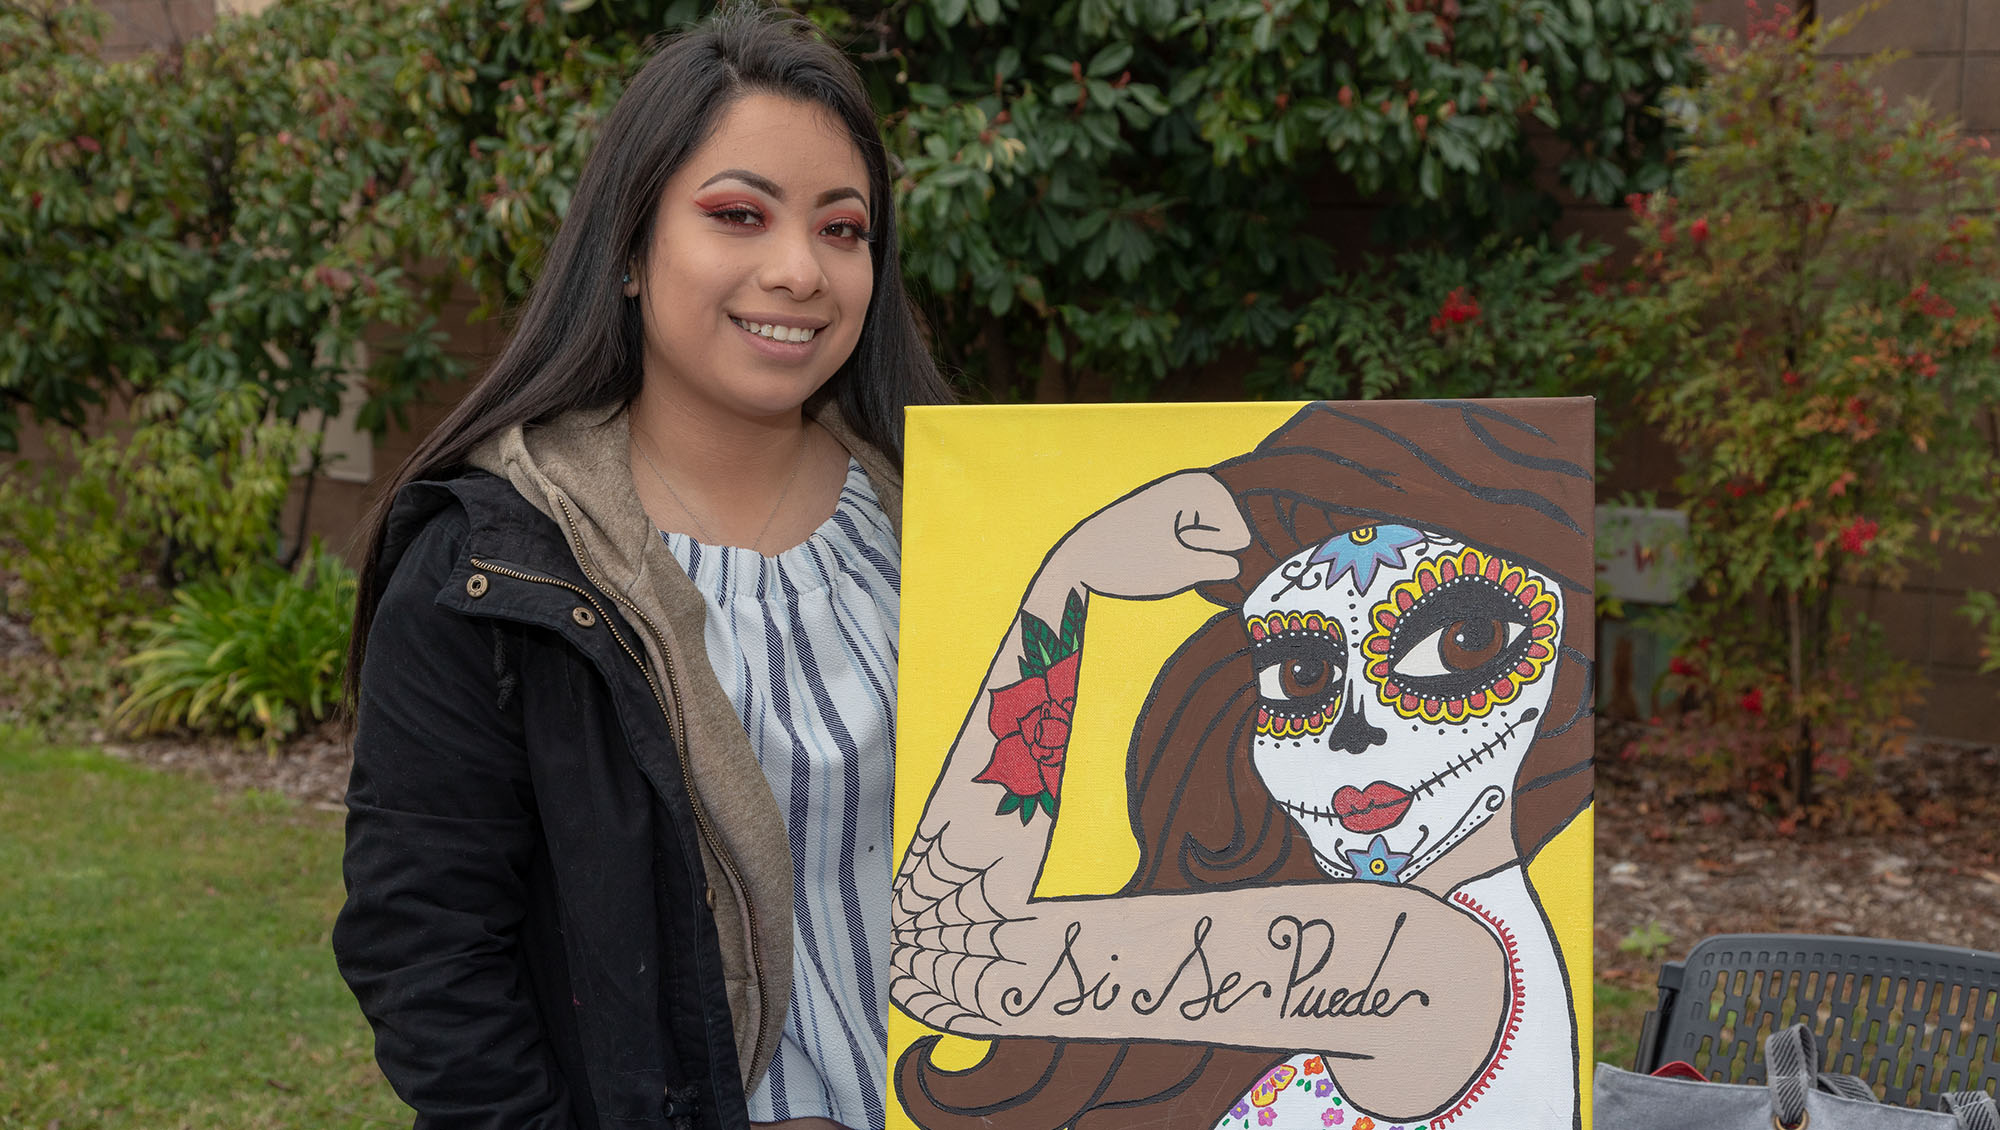 Sierra College graduate with her artwork named Si Si Puede